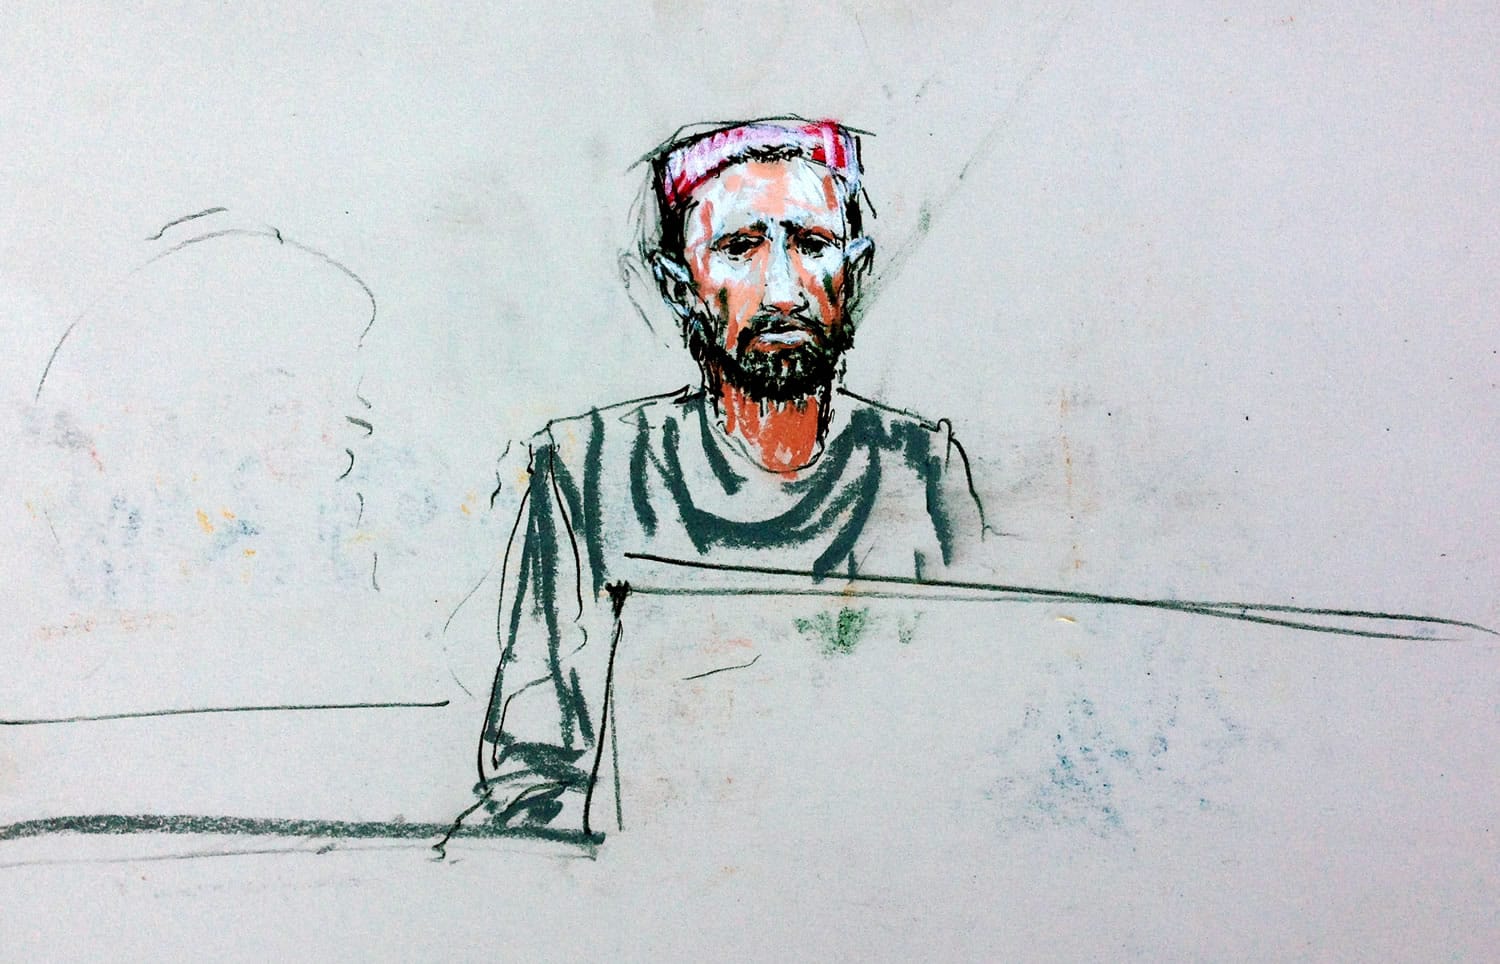 In this courtroom sketch, an Afghan man named Faizullah, about 30 years old, testifies in a courtroom at Joint Base Lewis-McChord on Tuesday about how his father, Haji Mohammad Naim, and brother Sadiquallah were shot and wounded when Staff Sgt. Robert Bales attacked their village in Kandahar Province.